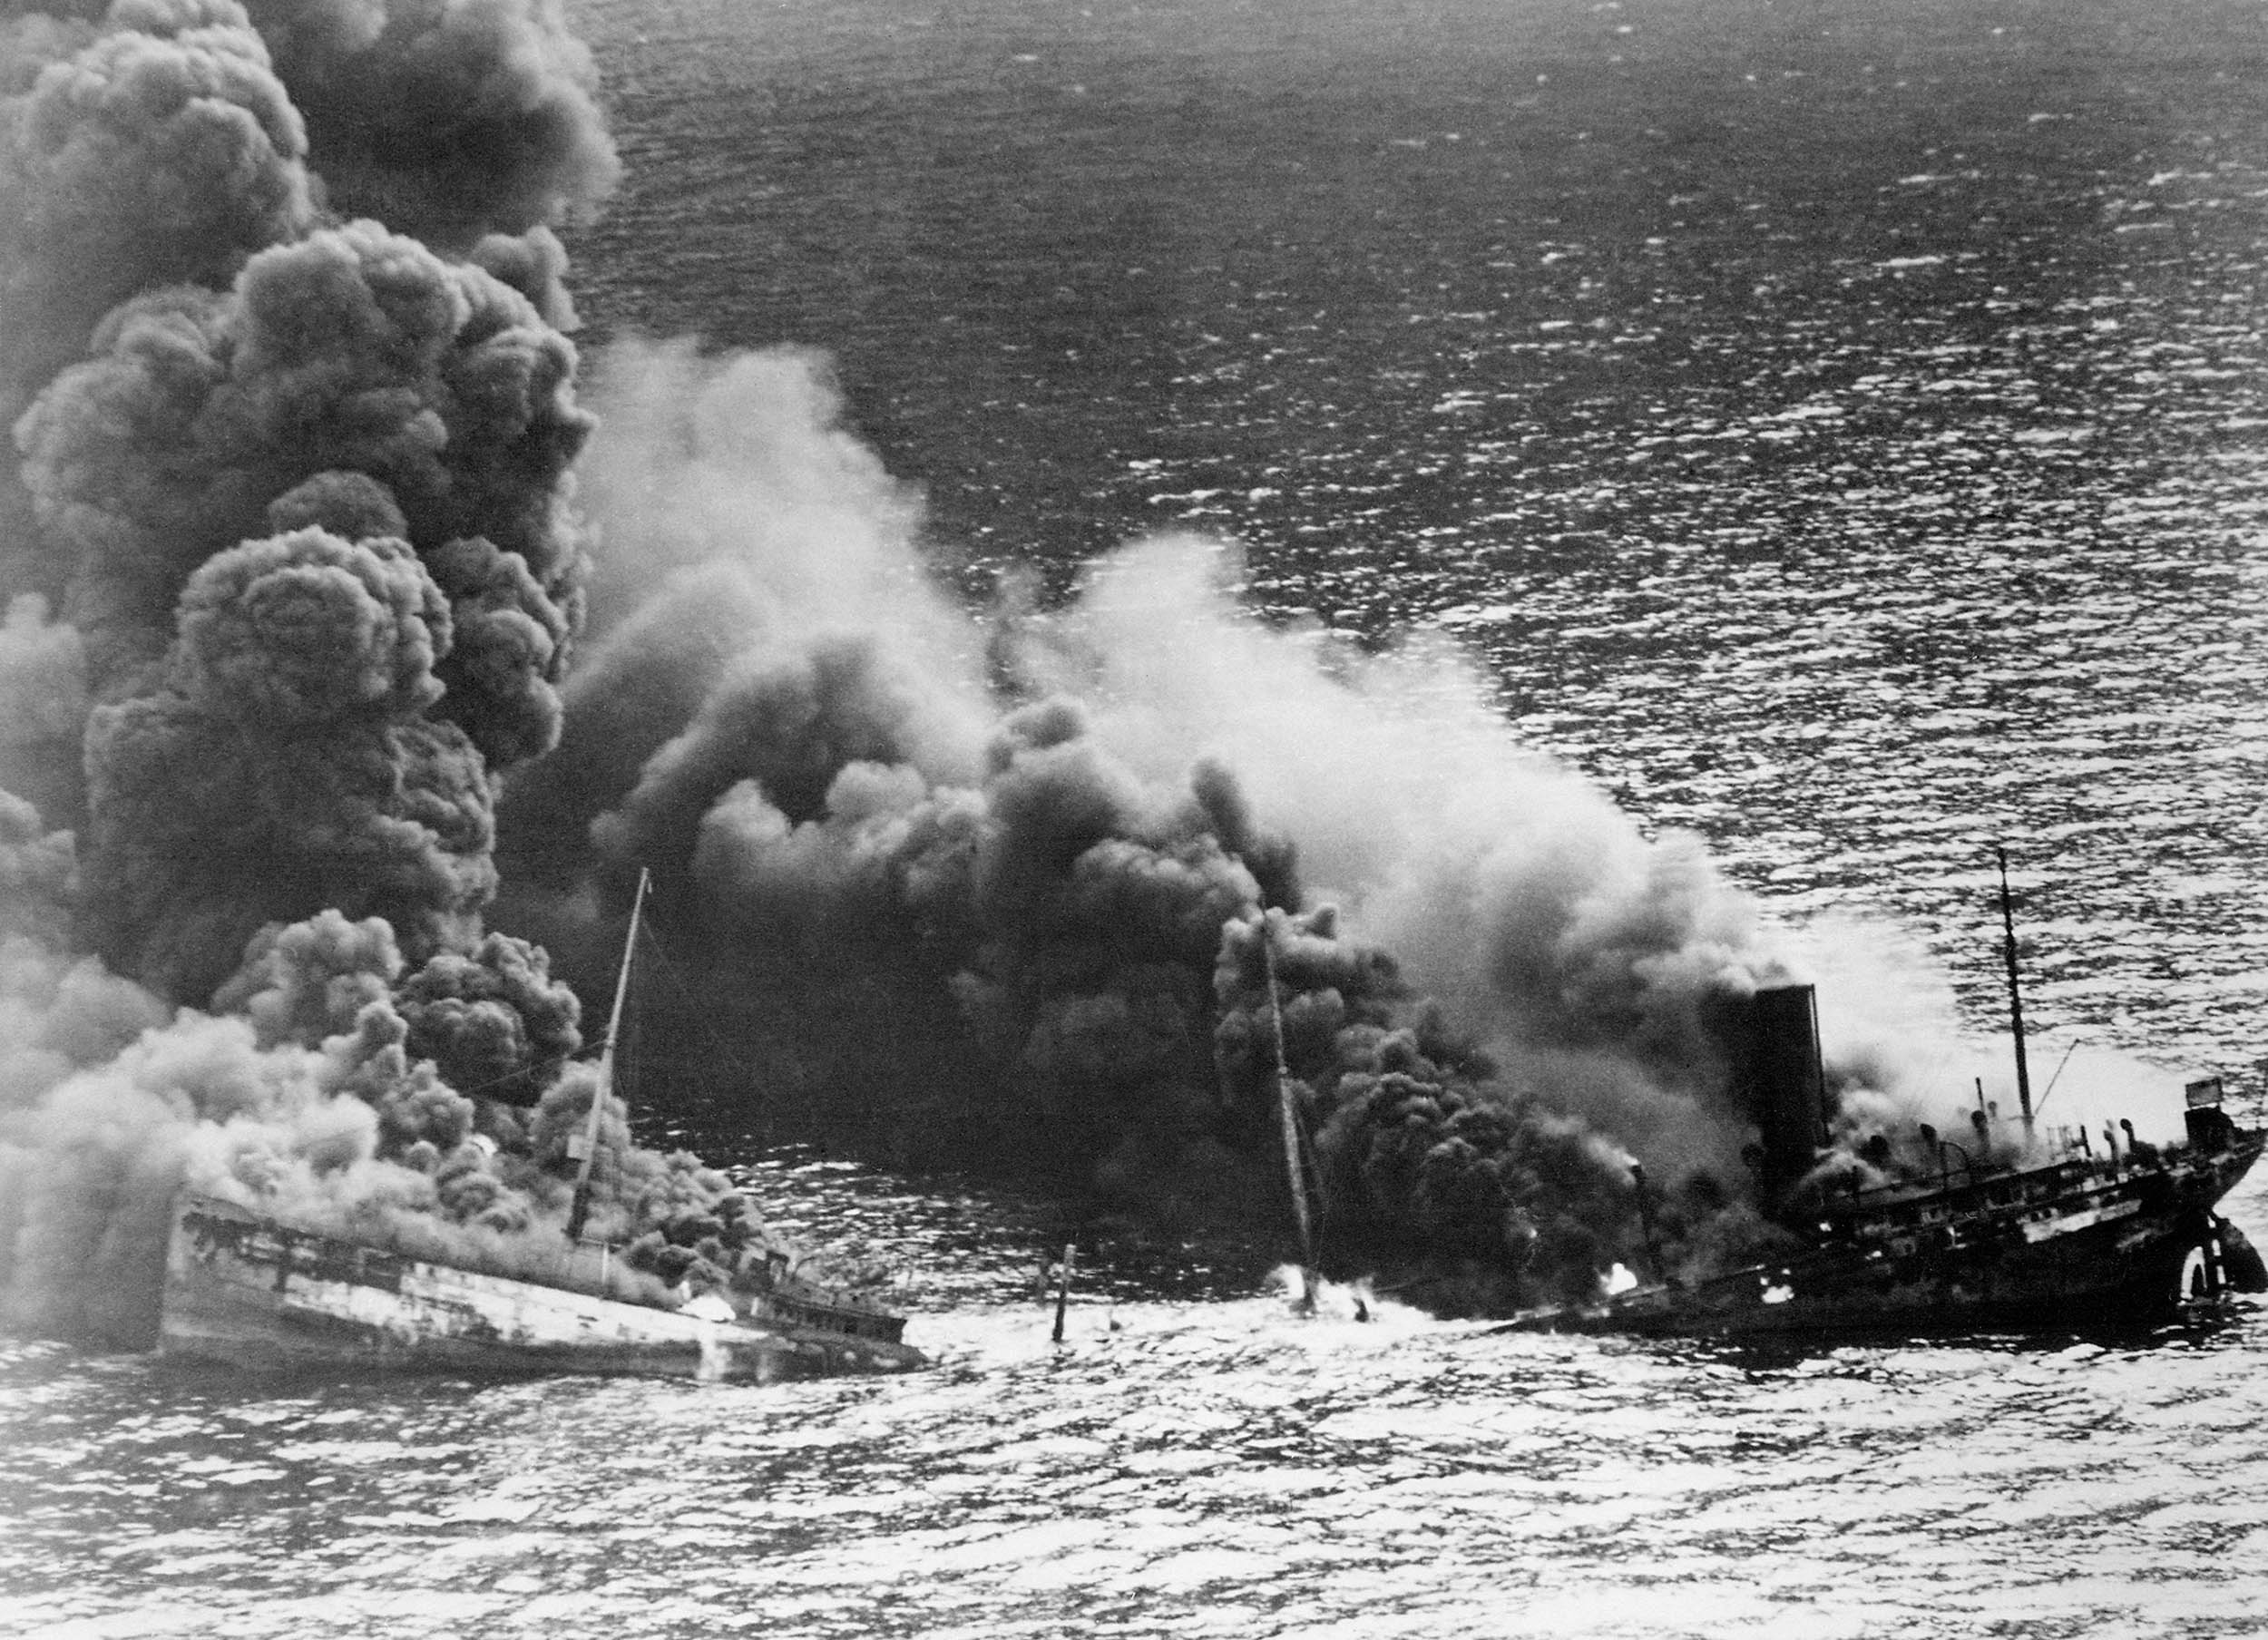 Allied tanker Dixie Arrow, torpedoed in Atlantic Ocean by German U-71, in 1942 (U.S. Navy/National Archives and Records Administration)